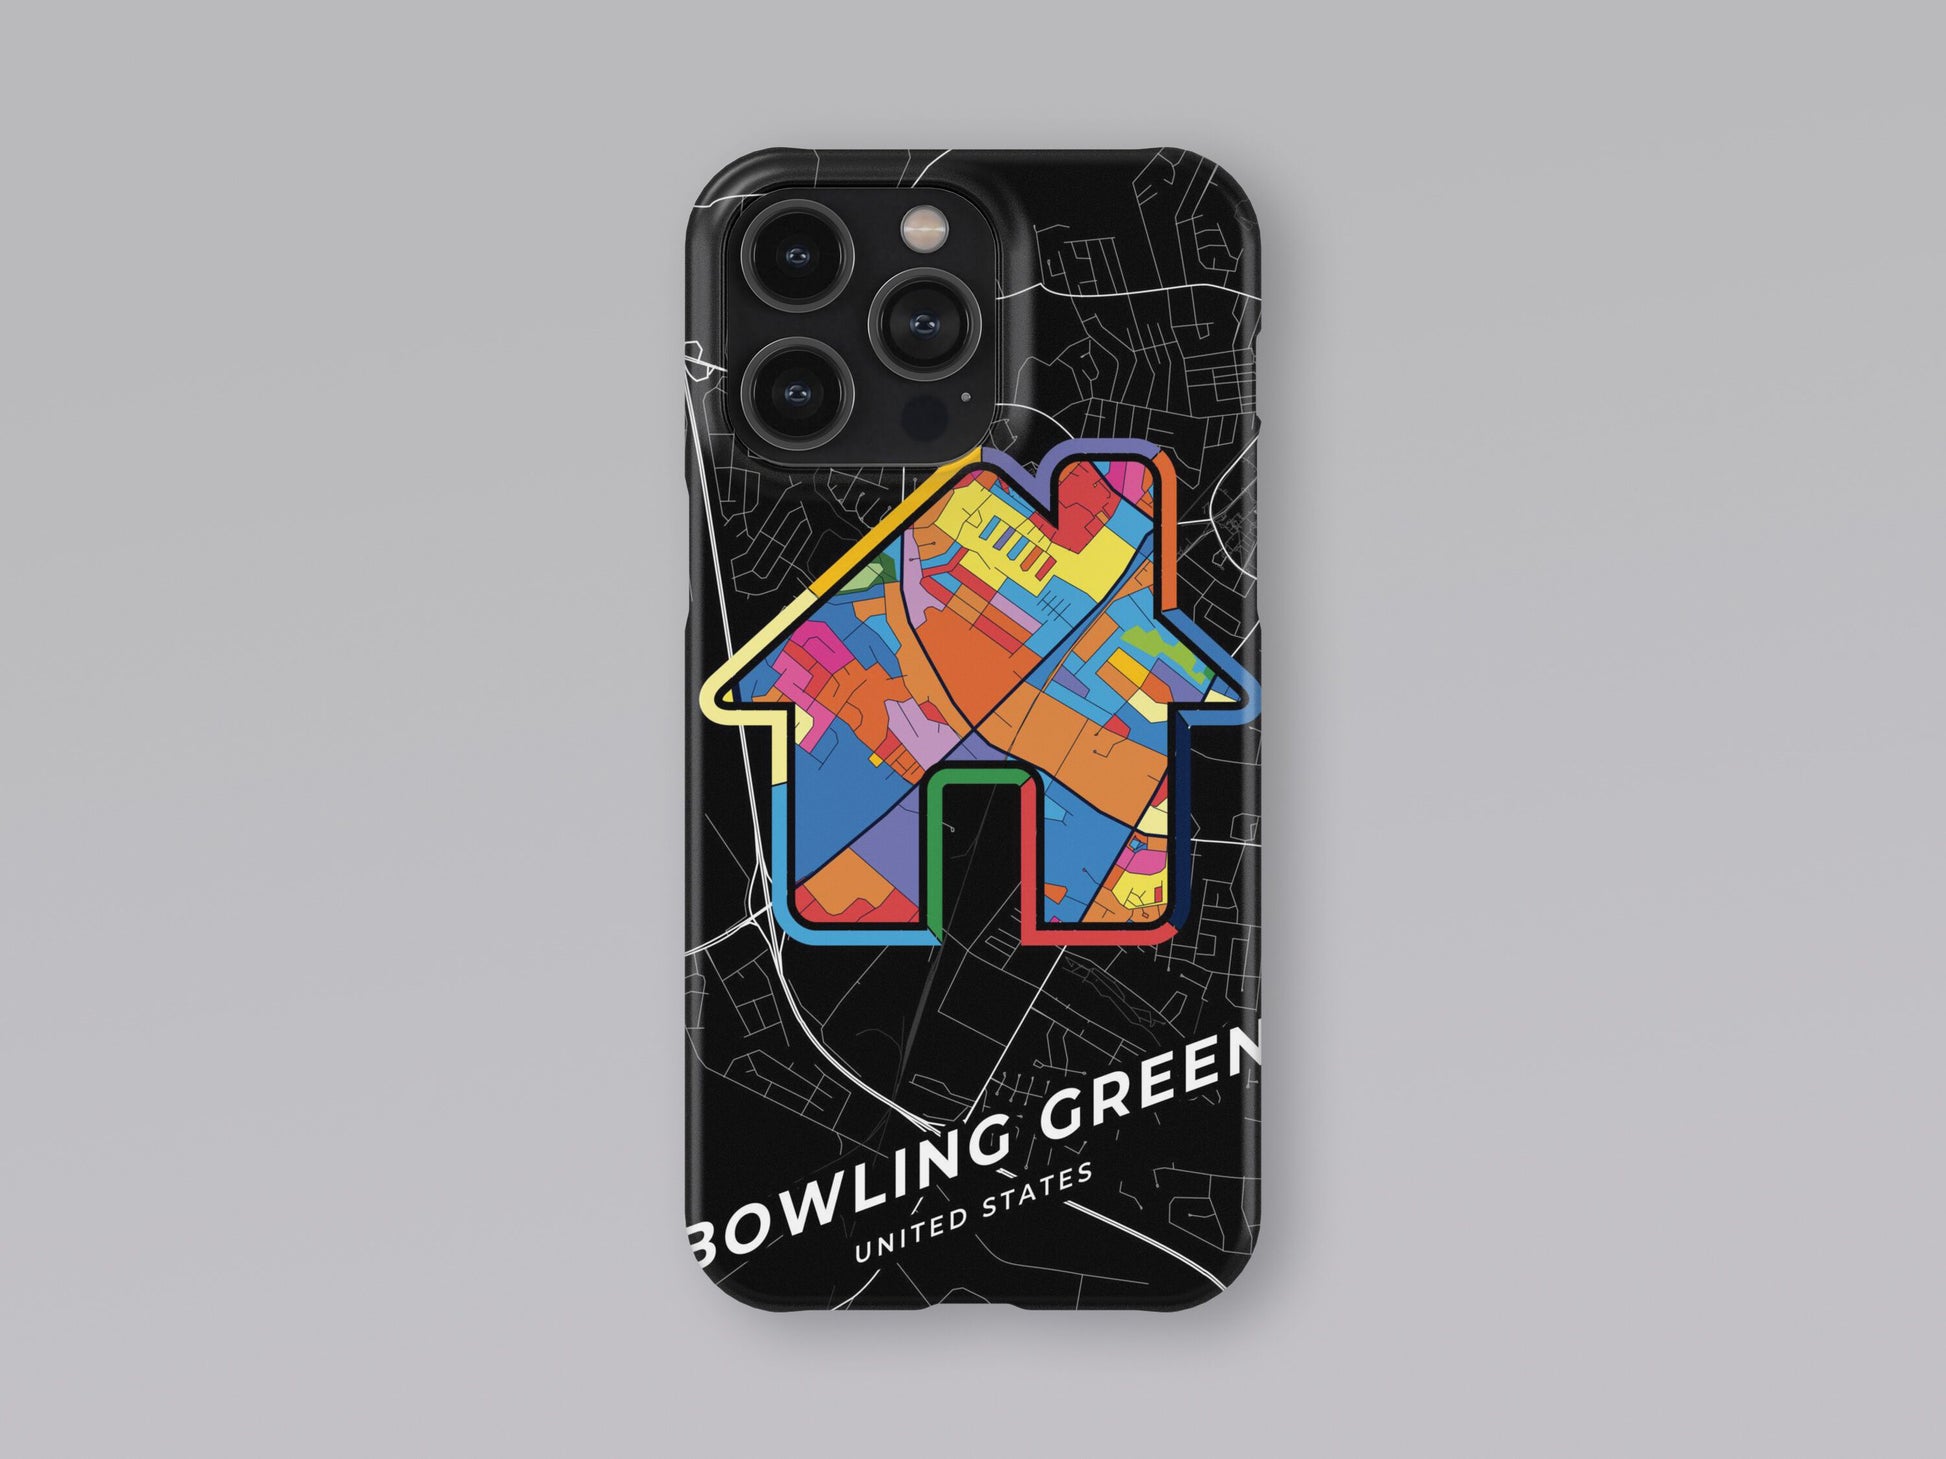 Bowling Green Kentucky slim phone case with colorful icon. Birthday, wedding or housewarming gift. Couple match cases. 3